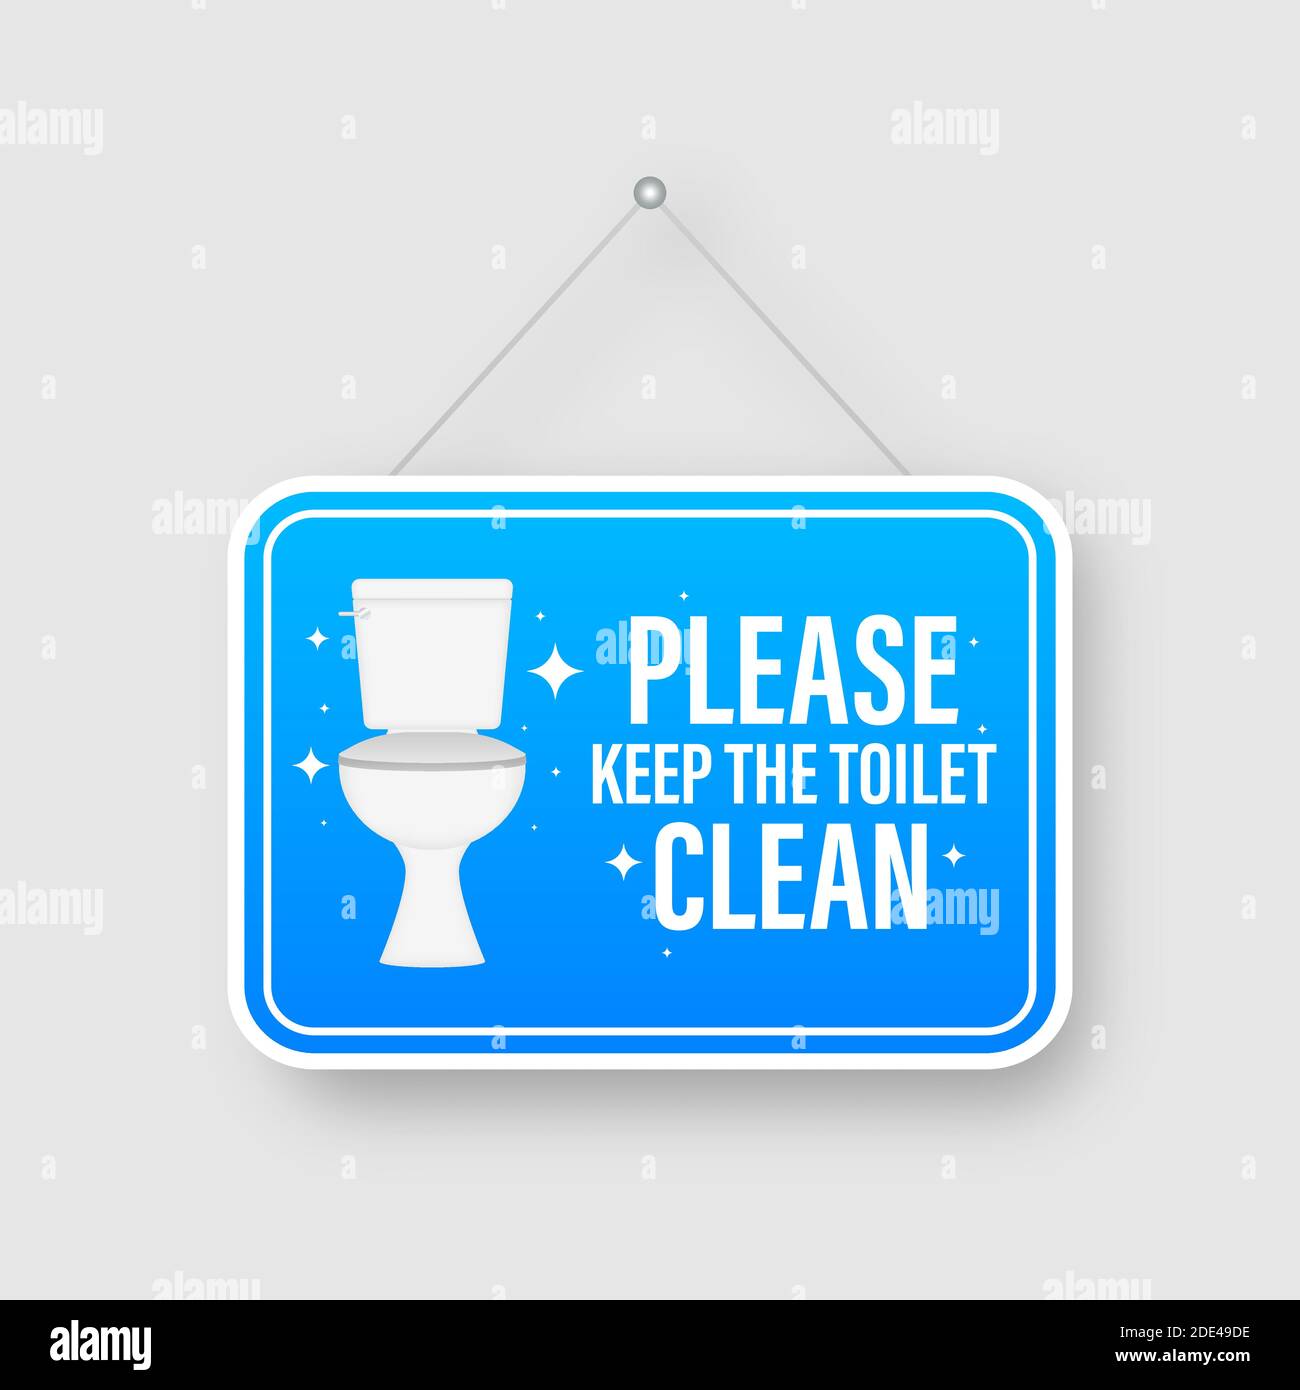 Please keep the toilets clena flat design informational plate. Vector stock illustration Stock Vector